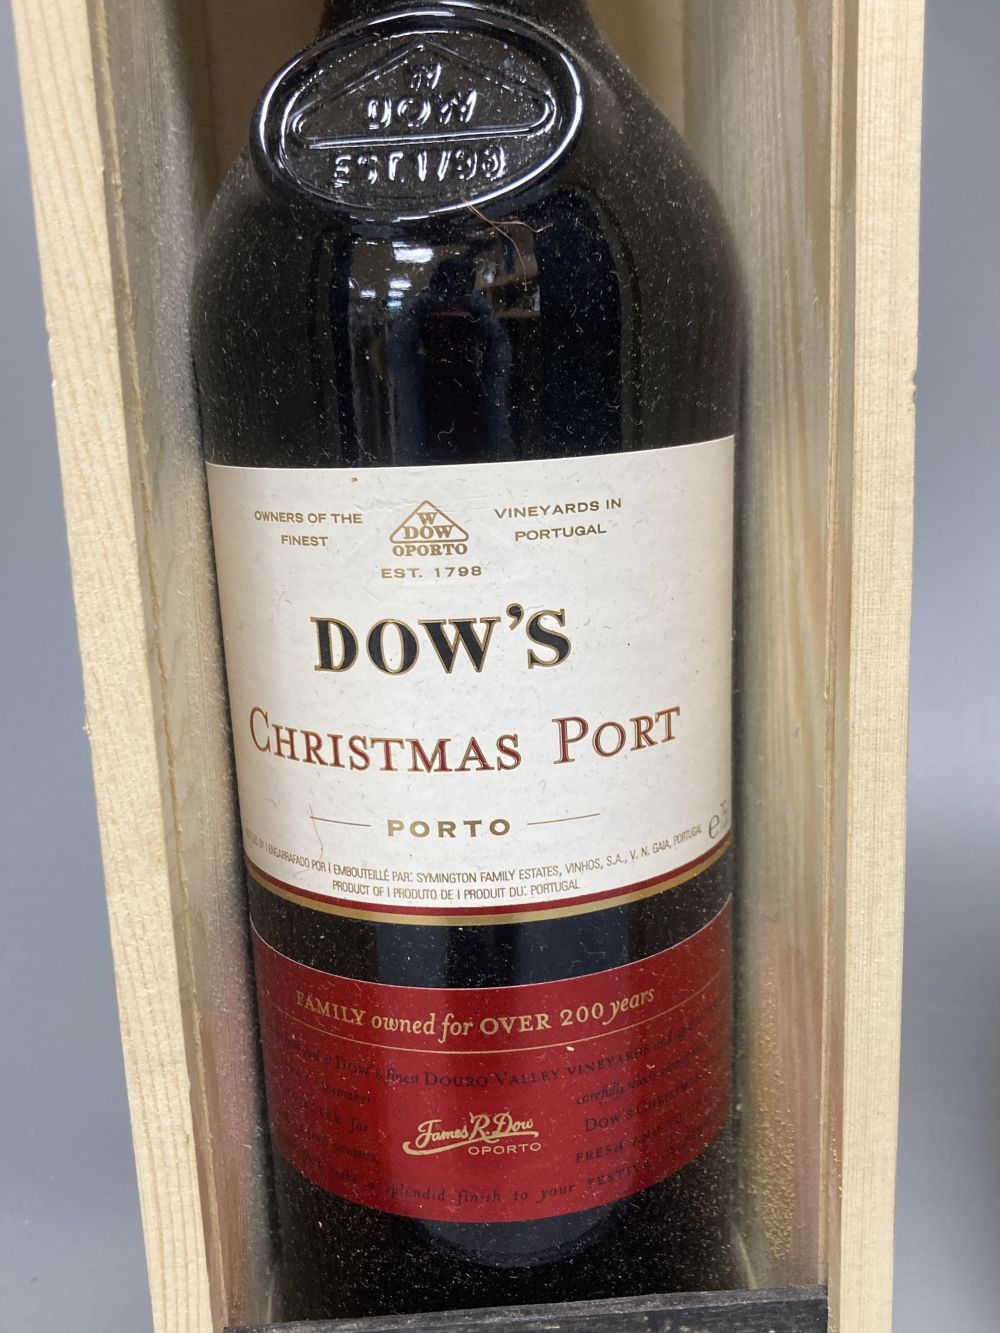 One bottle of Dows Christmas Port and a bottle of Chateau Pitray 1974